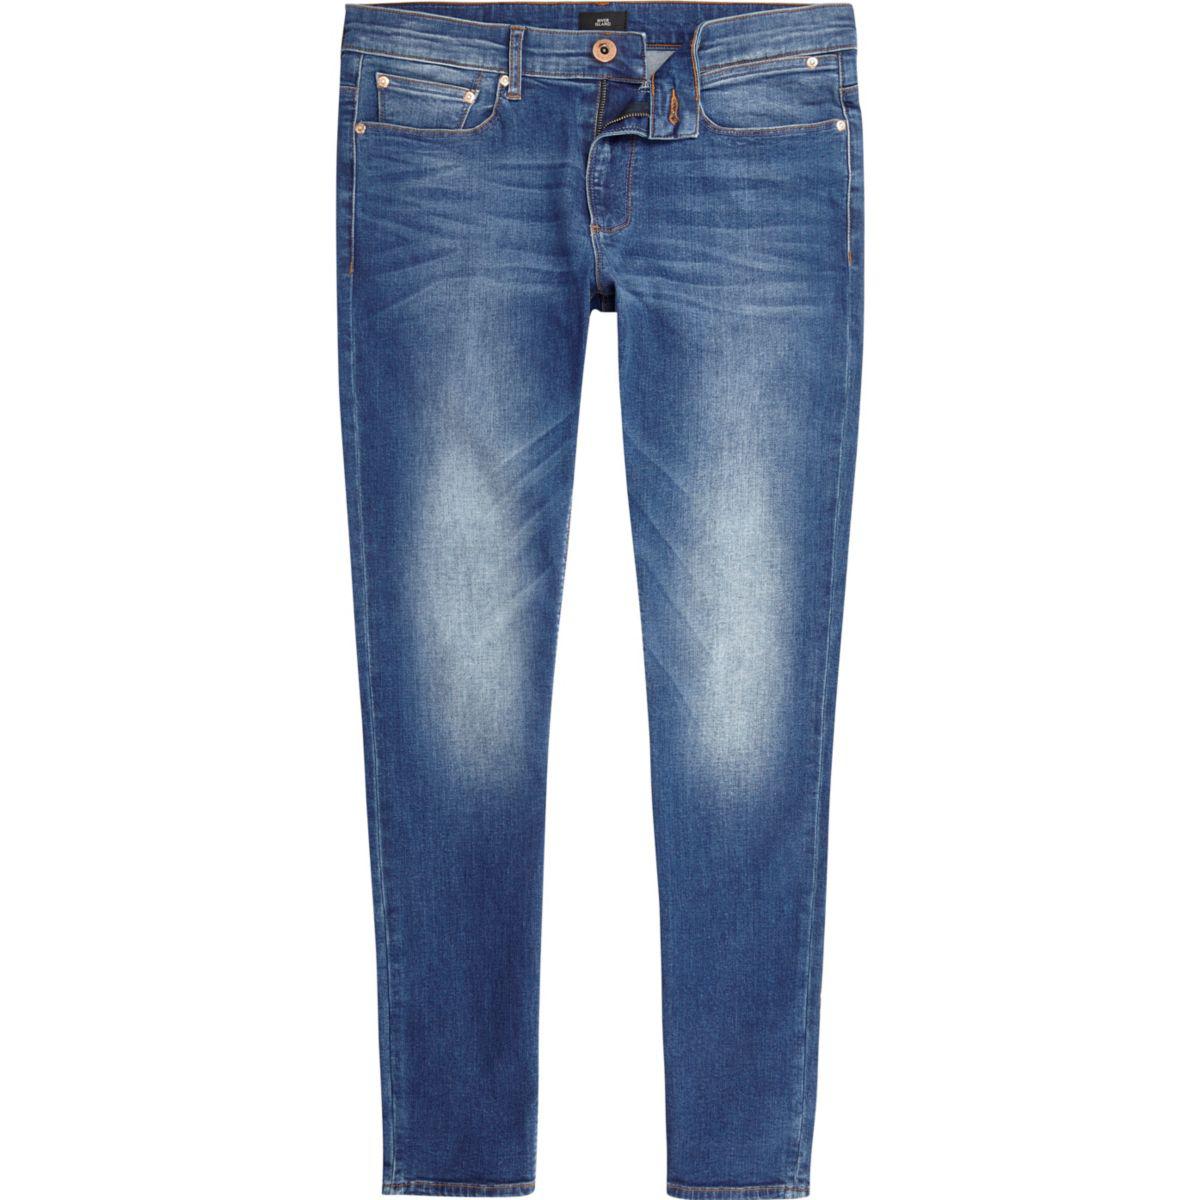 Lyst - River Island Mid Blue Sid Skinny Jeans in Blue for Men